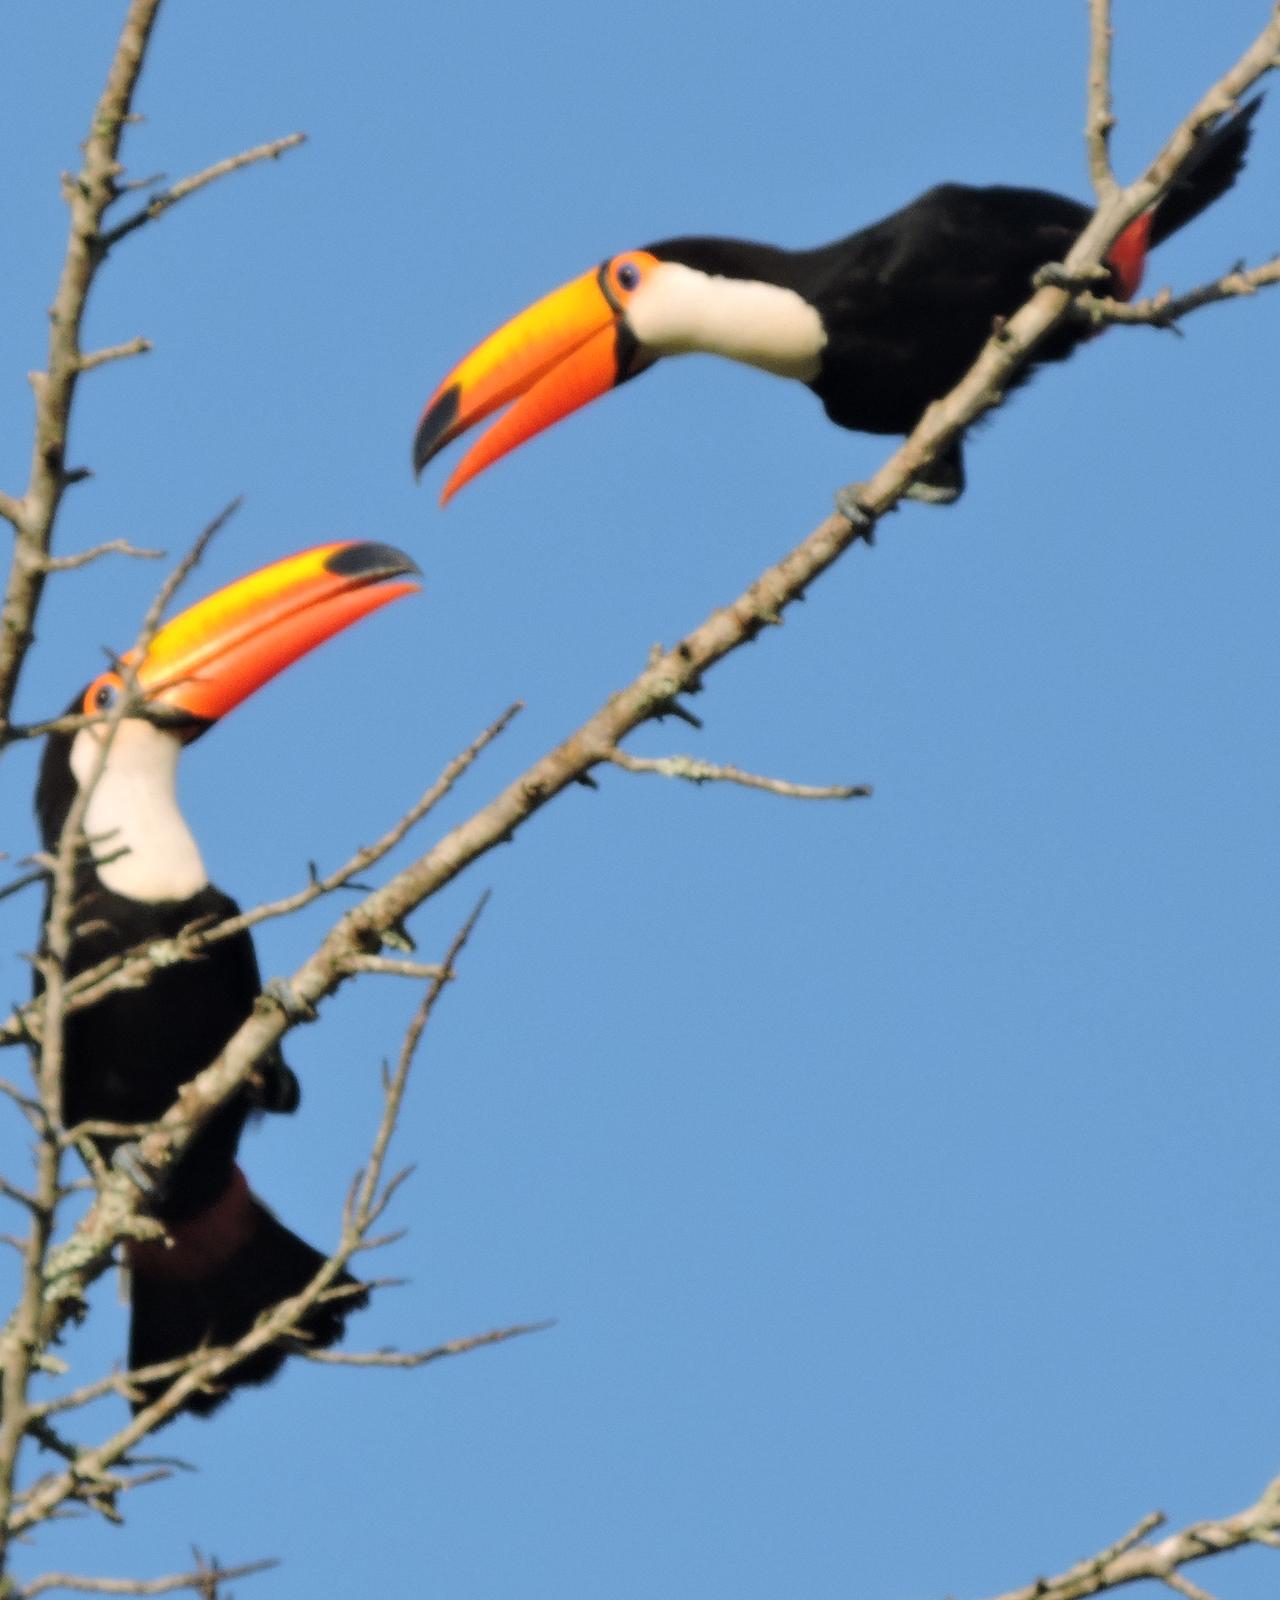 Toco Toucan Photo by Peter Lowe